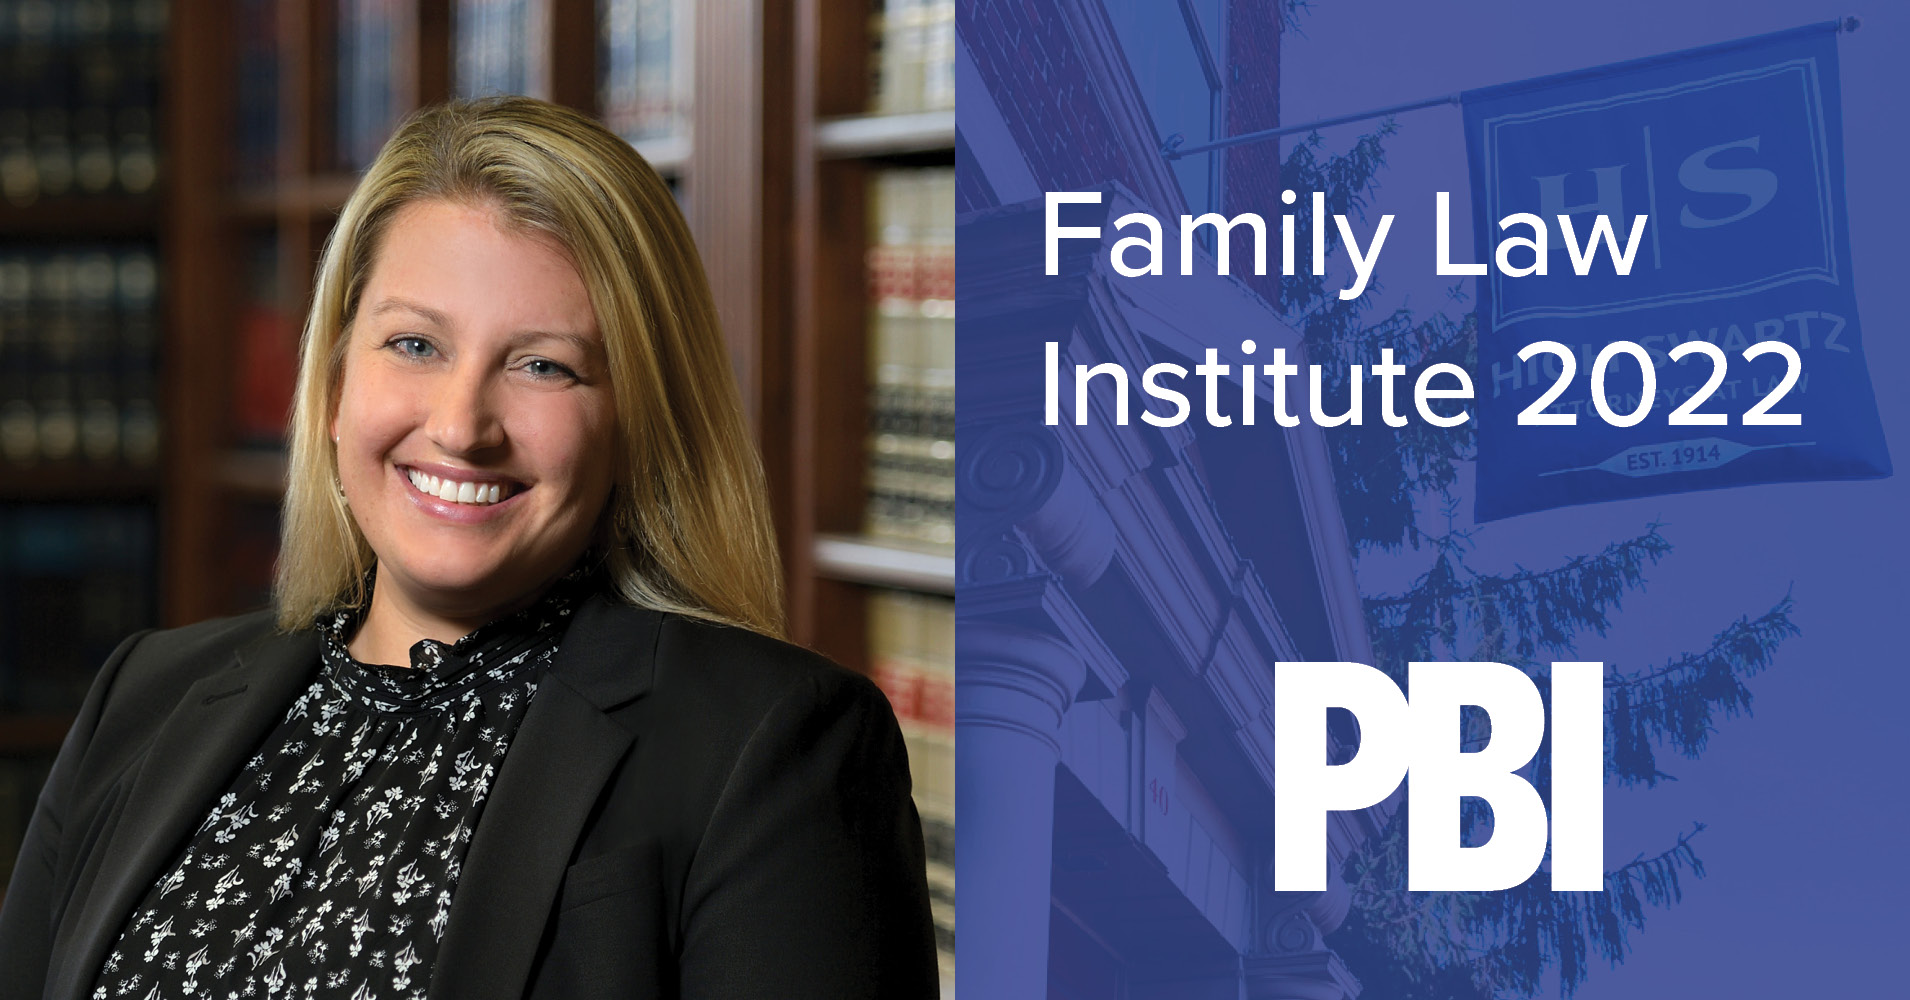 Elizabeth C. Early to Present at PBI Family Law Institute 2022